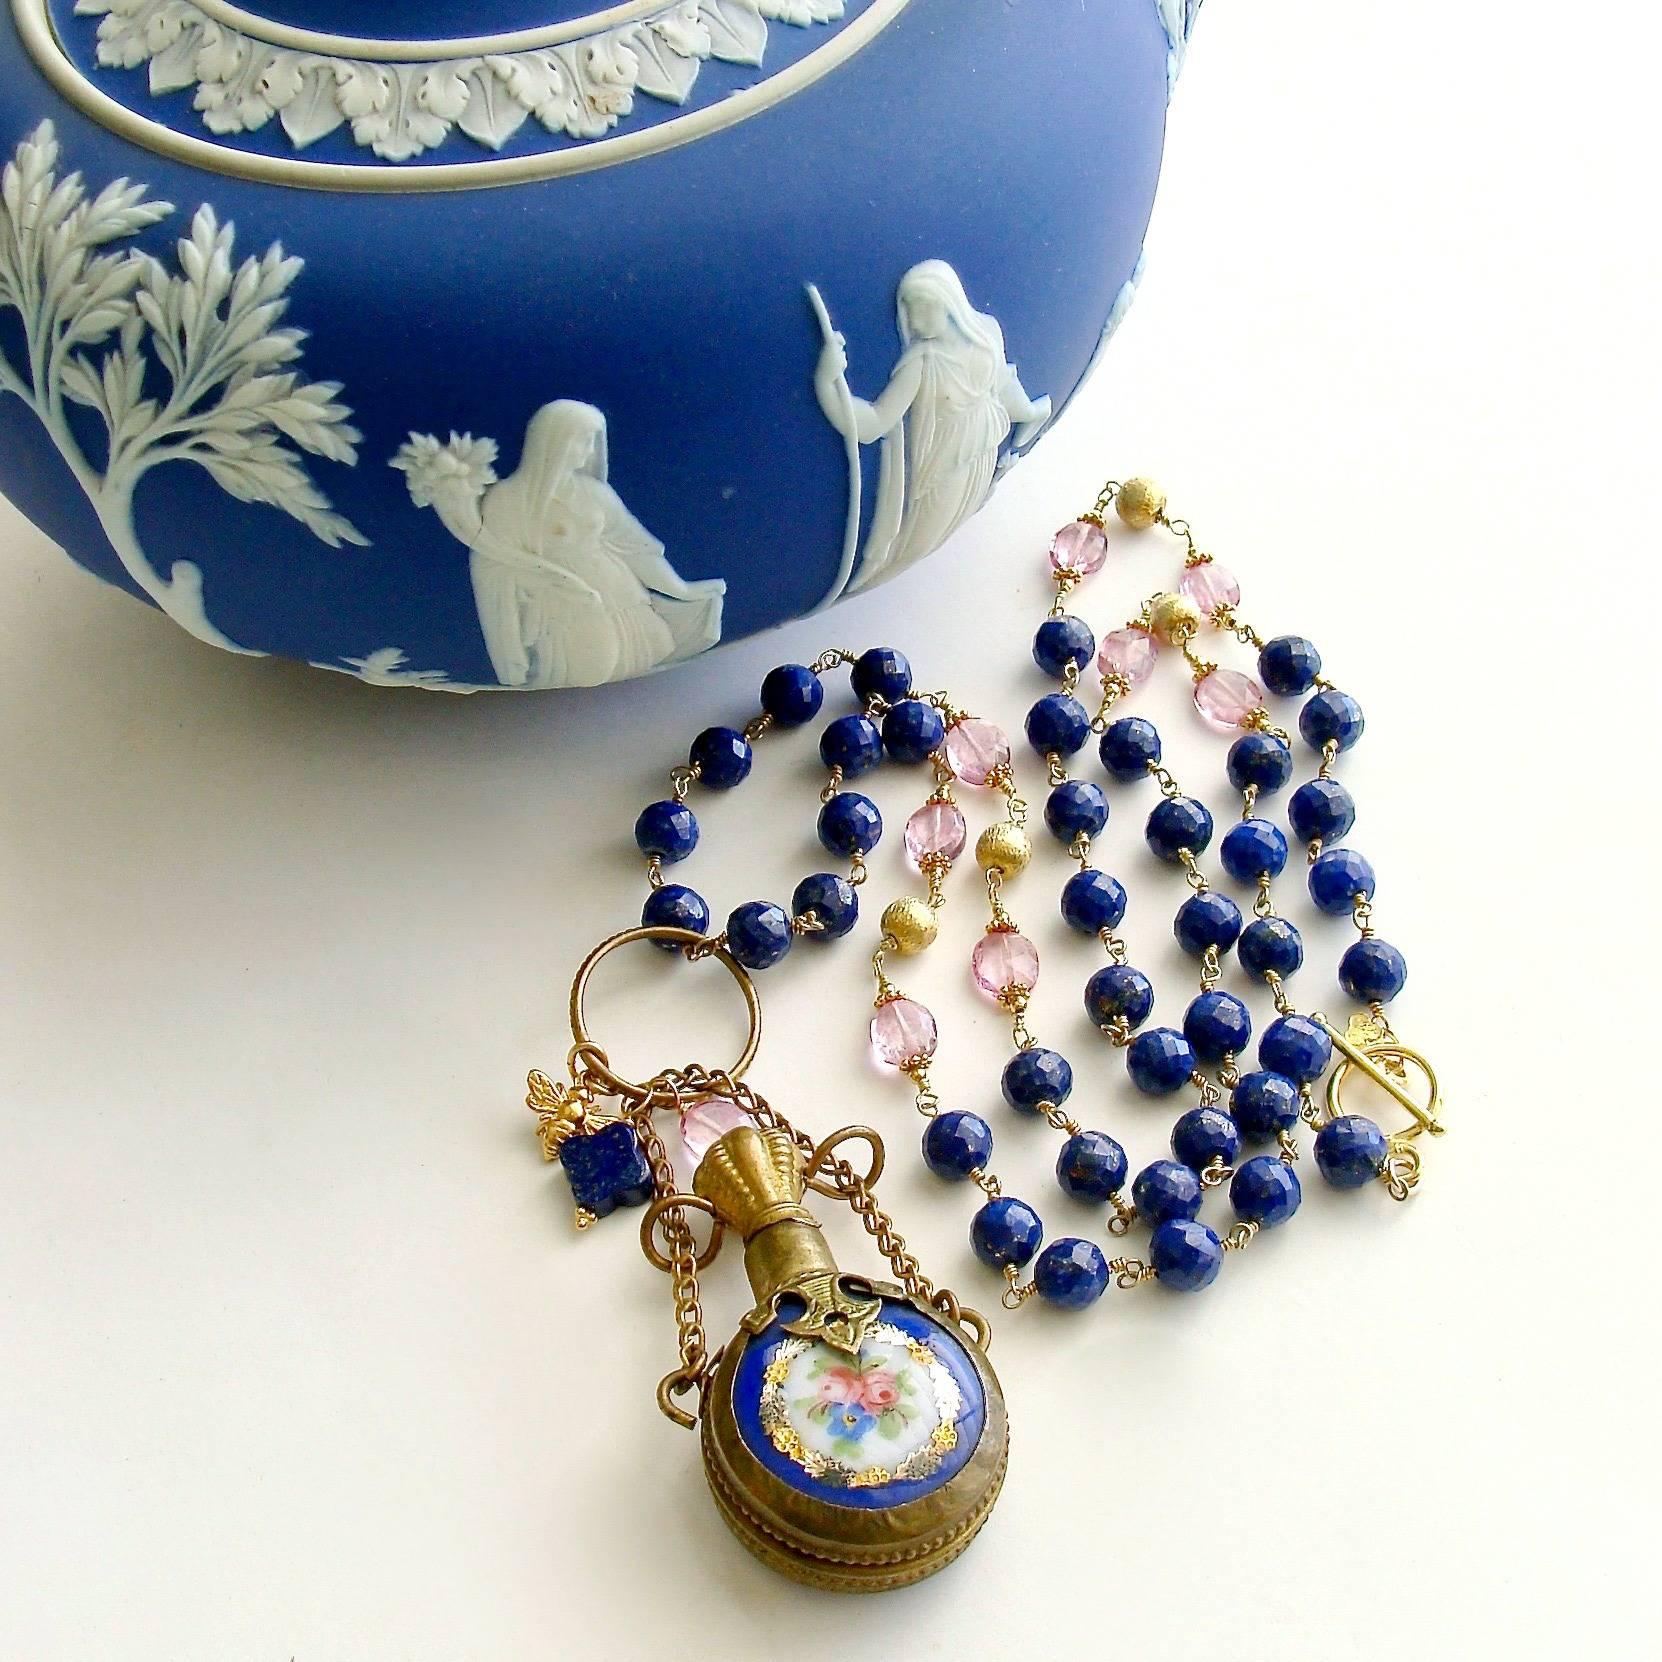 Lillian Necklace.

A long strand of beautiful cobalt blue faceted lapis beads are intersected with stations of brushed gold vermeil beads flanked by soft pink quartz oval beads.  The focal point of the necklace is the charming hand painted cobalt